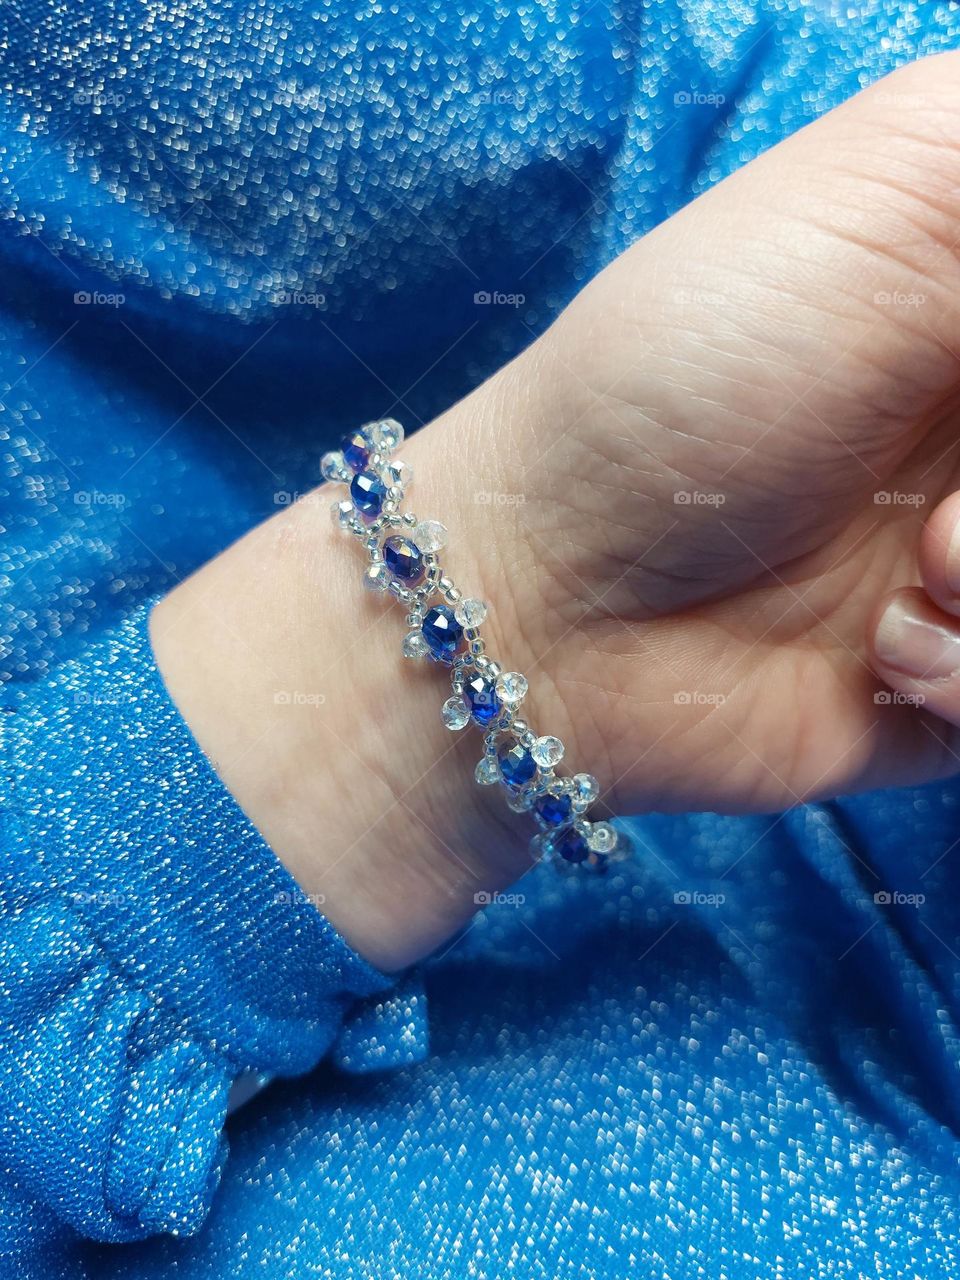 handmade braclet with blue sparkly stones.